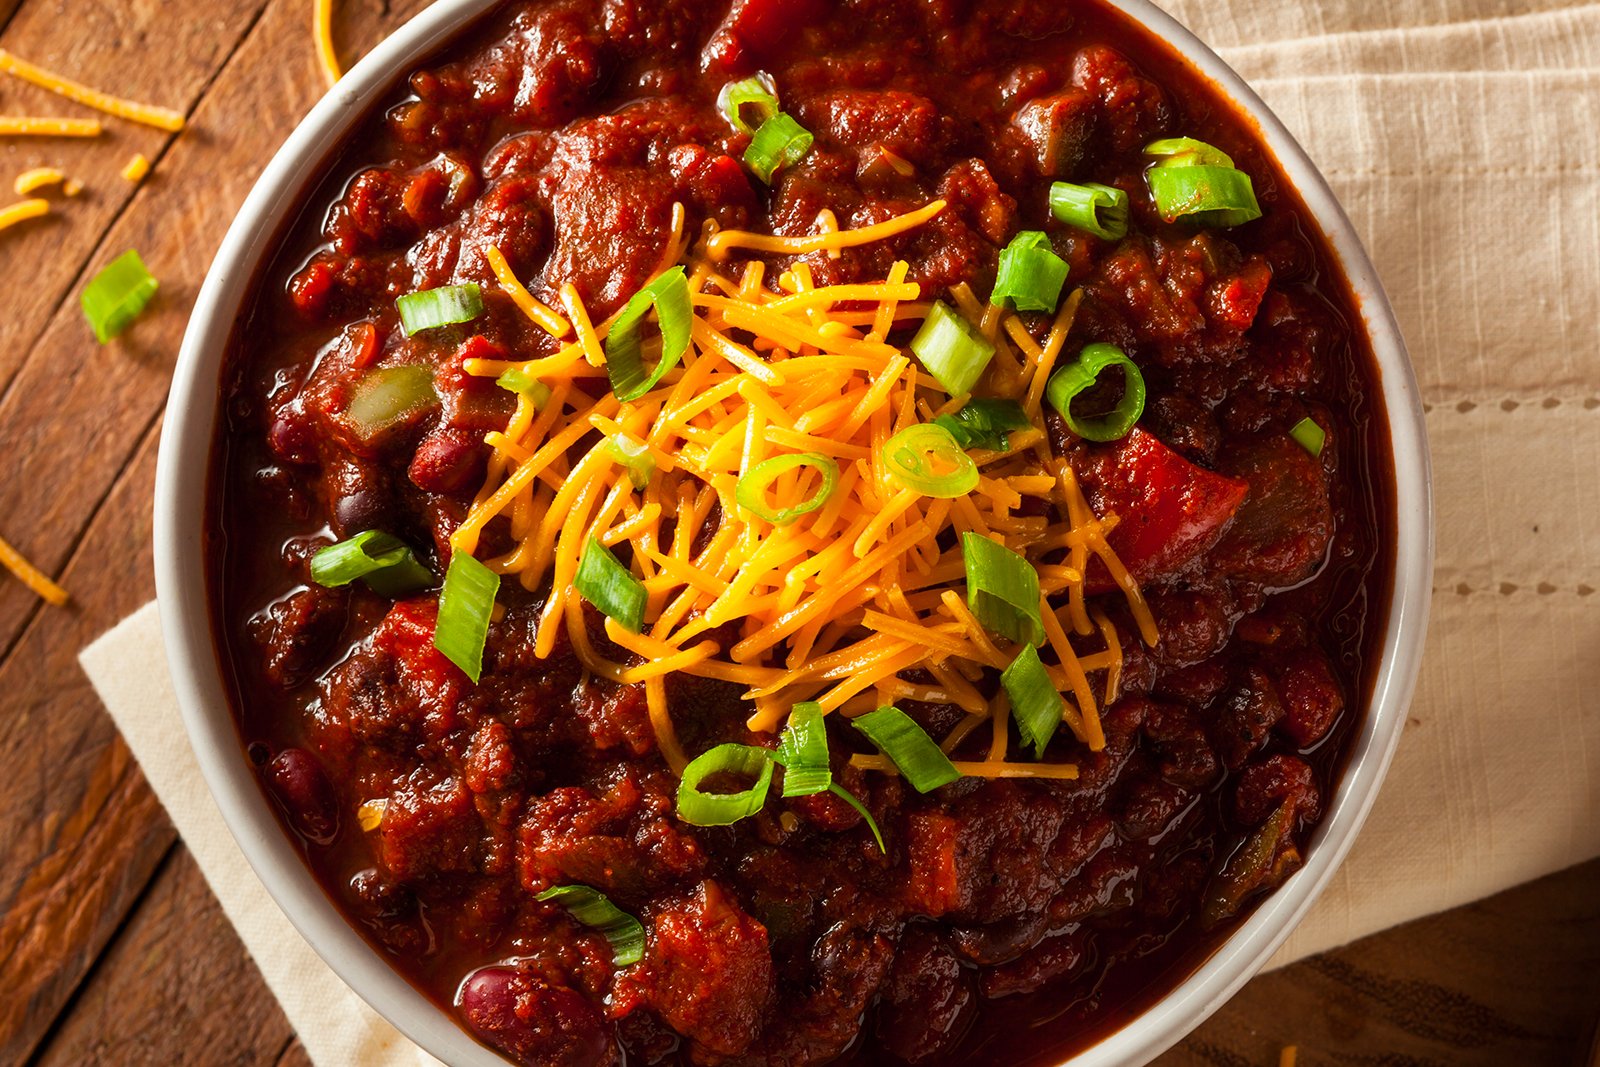 Overhead shot of chili in a bowl with green onions and cheese on top